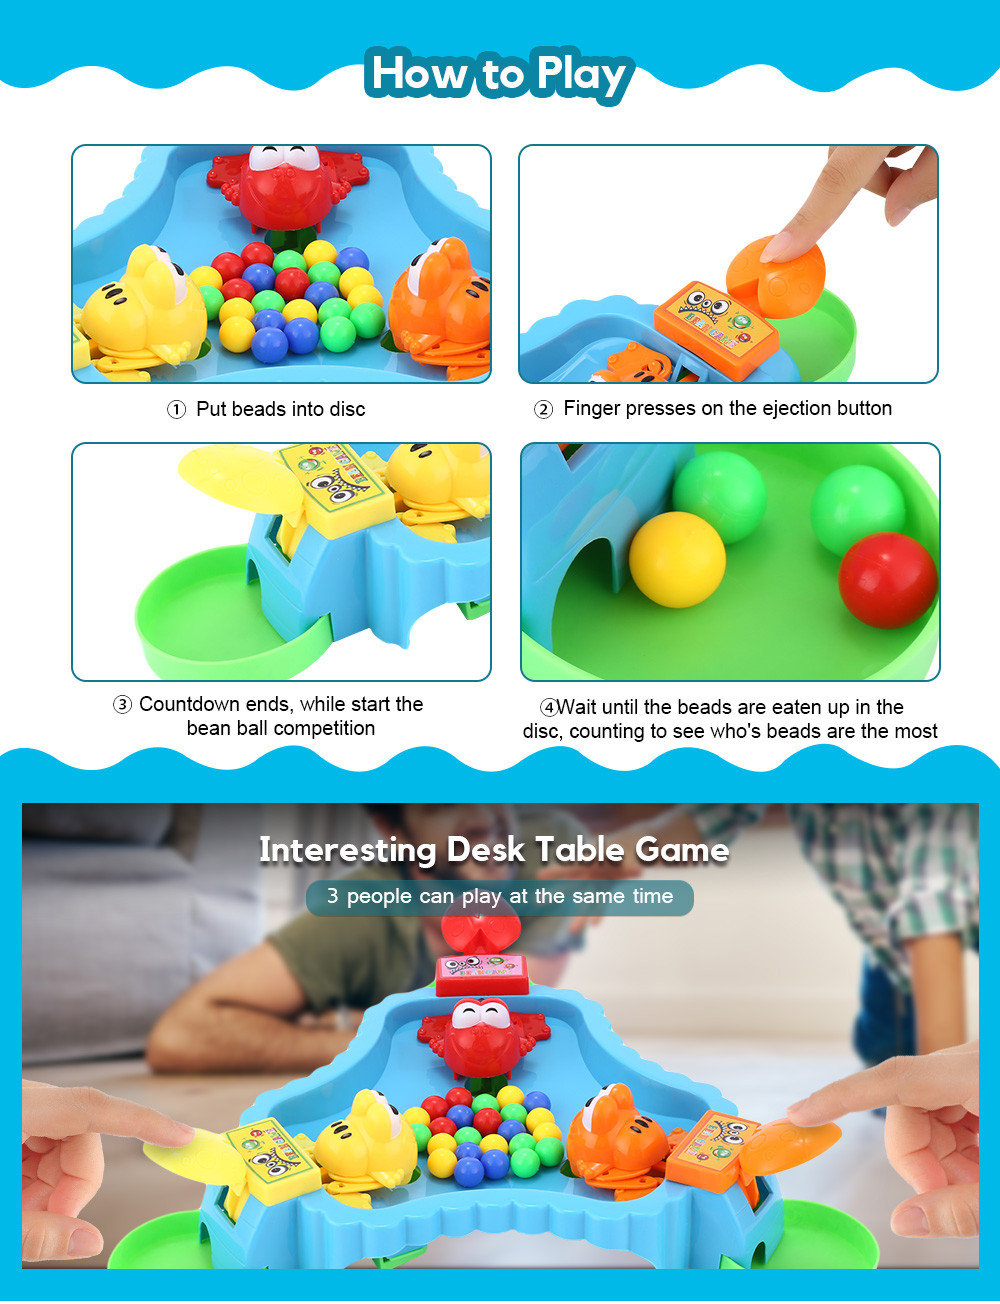 3226 Frog Eating Bean Board Toys Interactive Desk Table Game